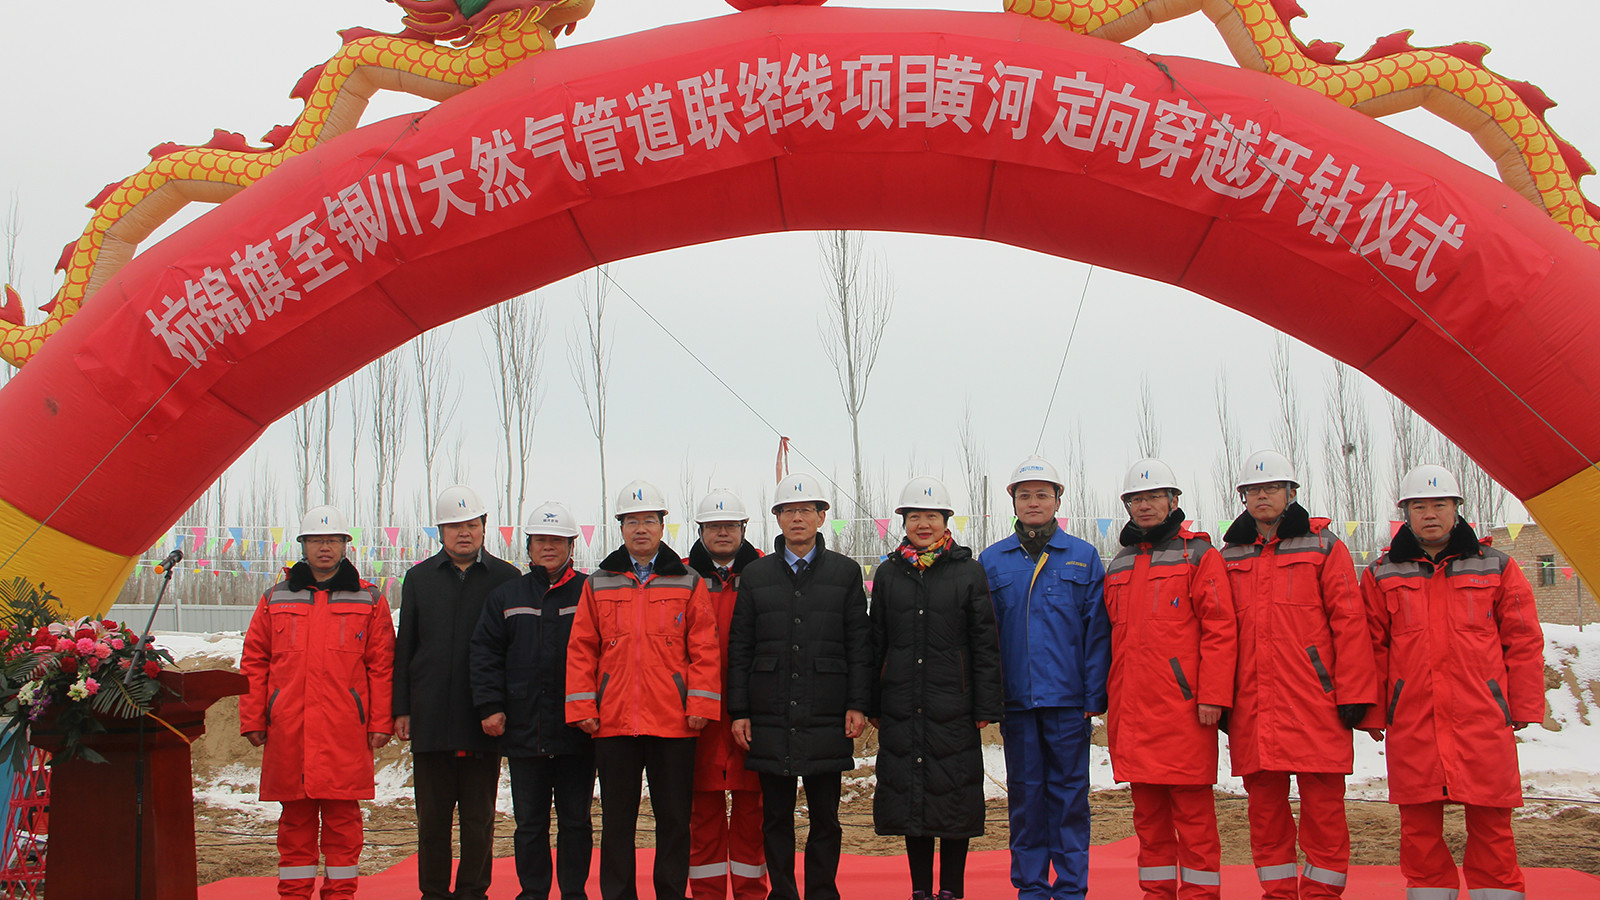 Natural gas pipeline tie-line project from Hangjinqi to Yinchuan was started drilling to go through Yellow River